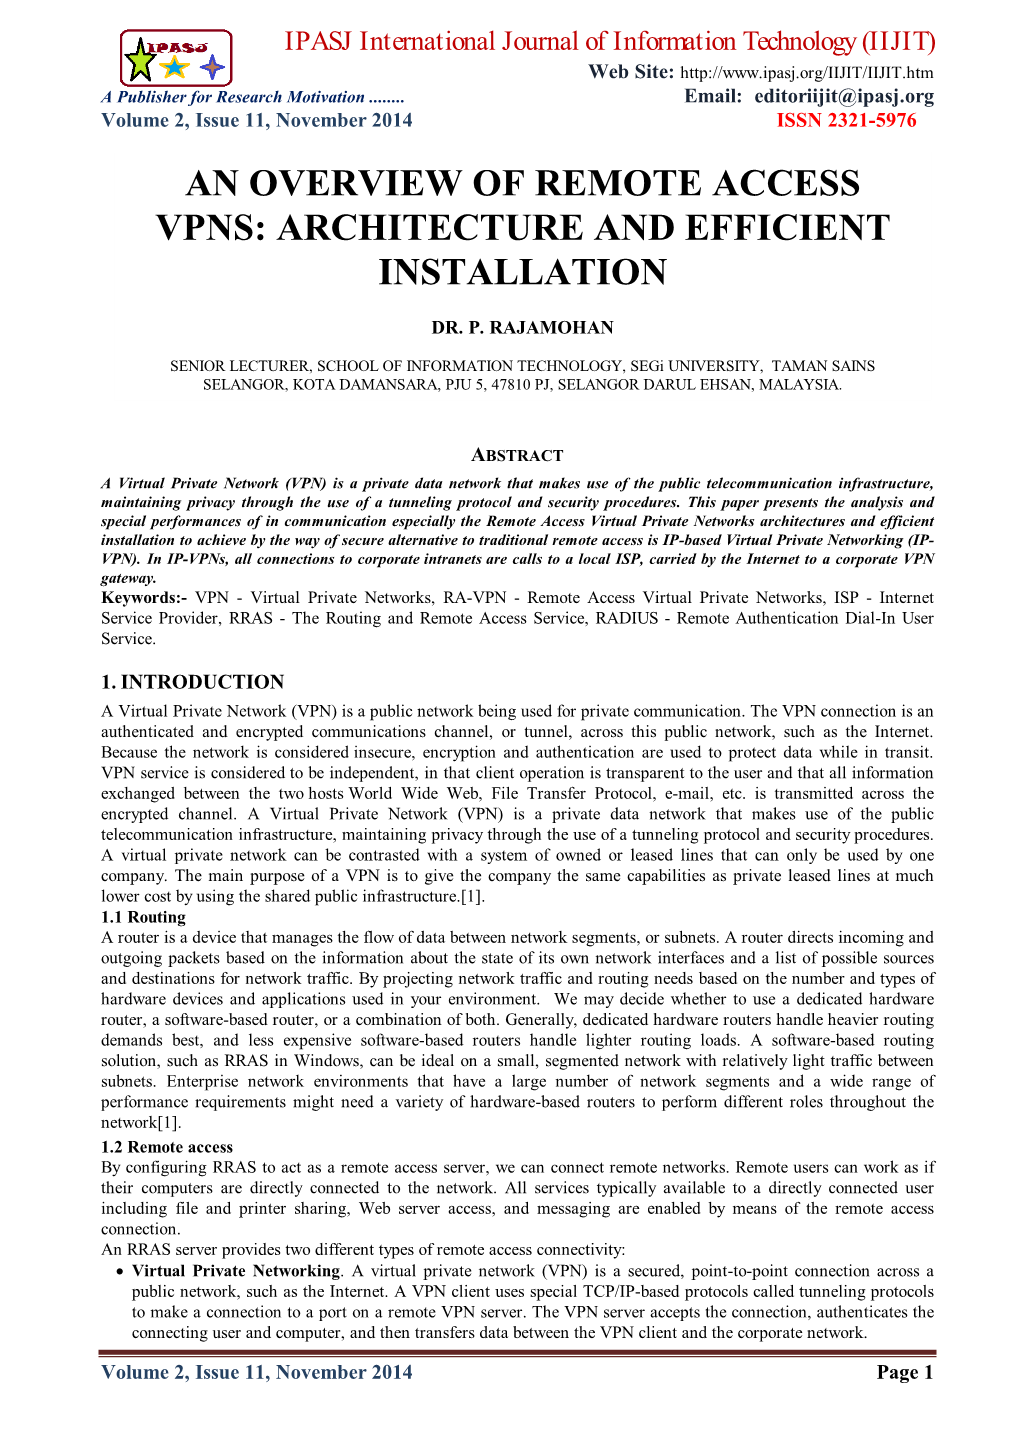 An Overview of Remote Access Vpns: Architecture and Efficient Installation